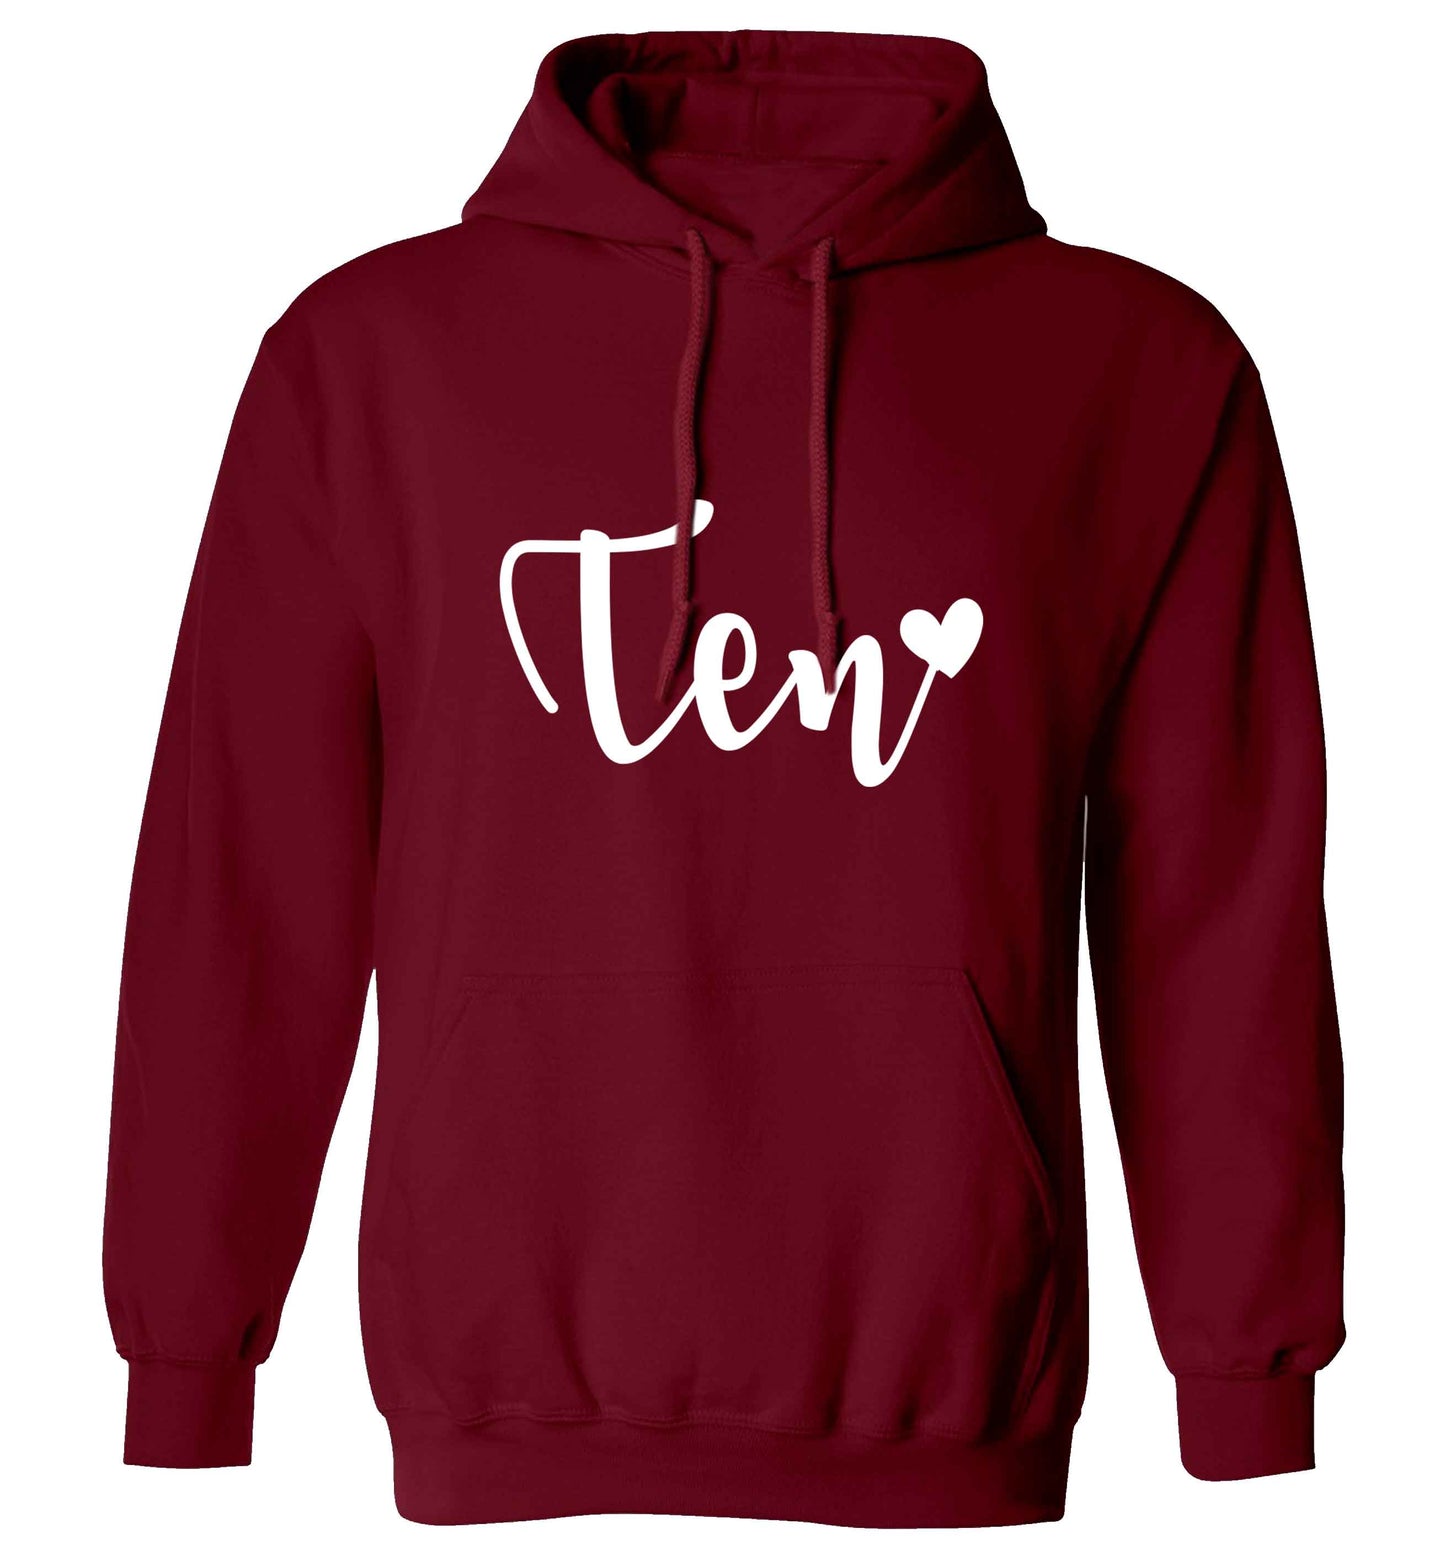 Rose gold eleven adults unisex maroon hoodie 2XL